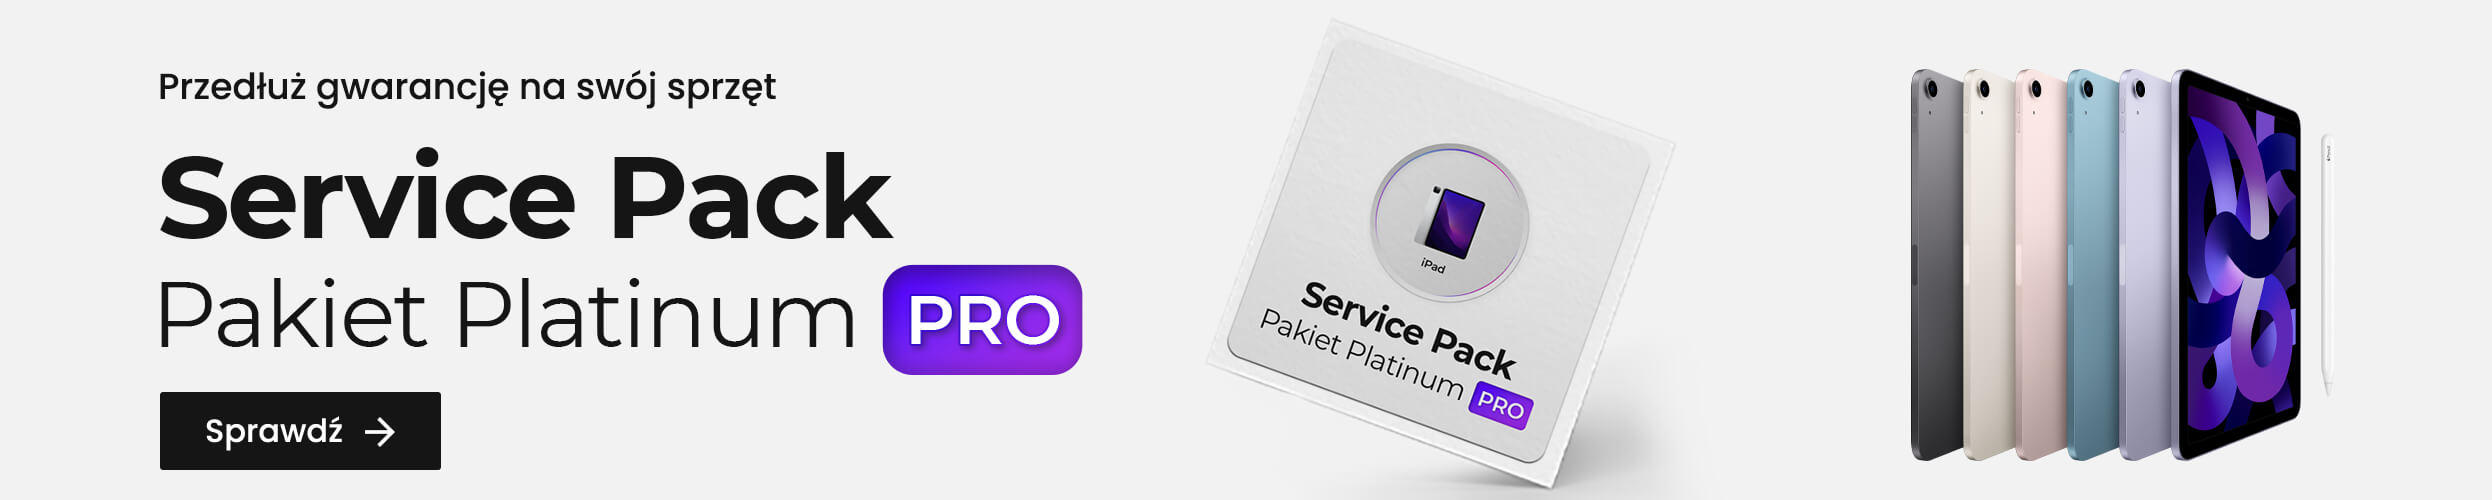 Pcoutlet - Service Pack